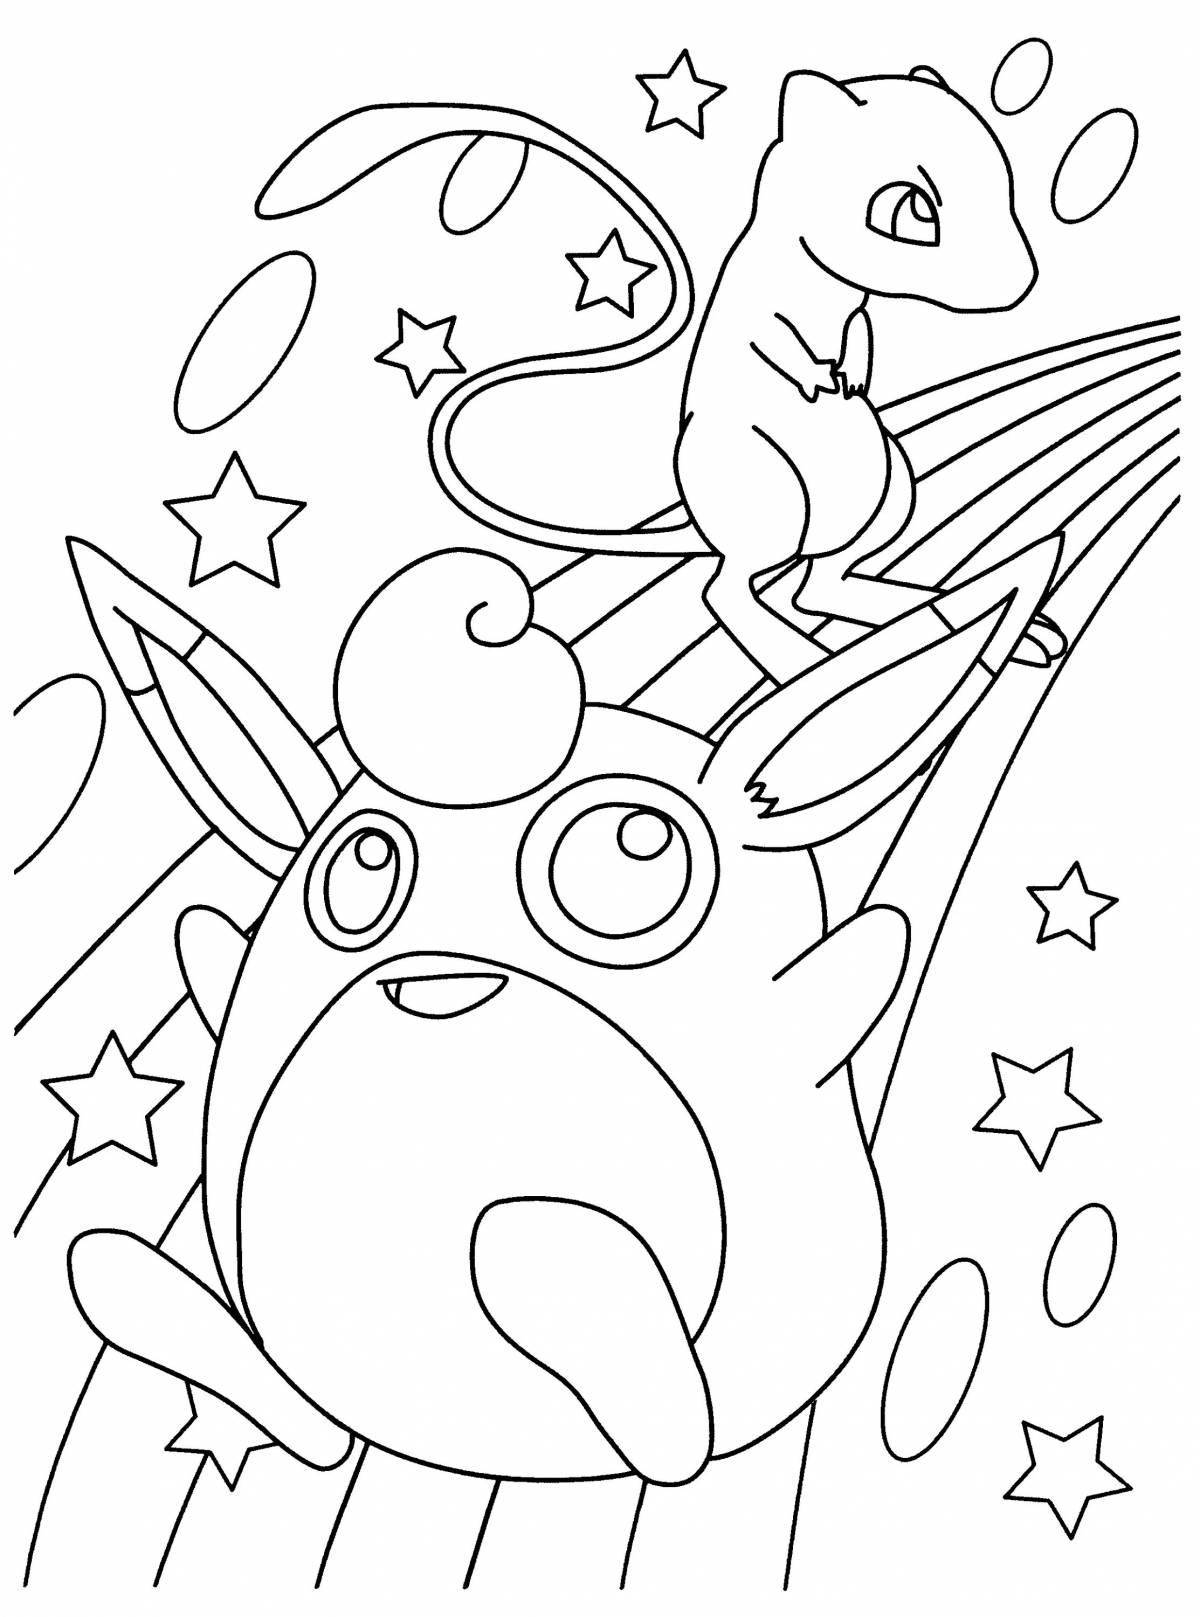 Pokemon live coloring for kids